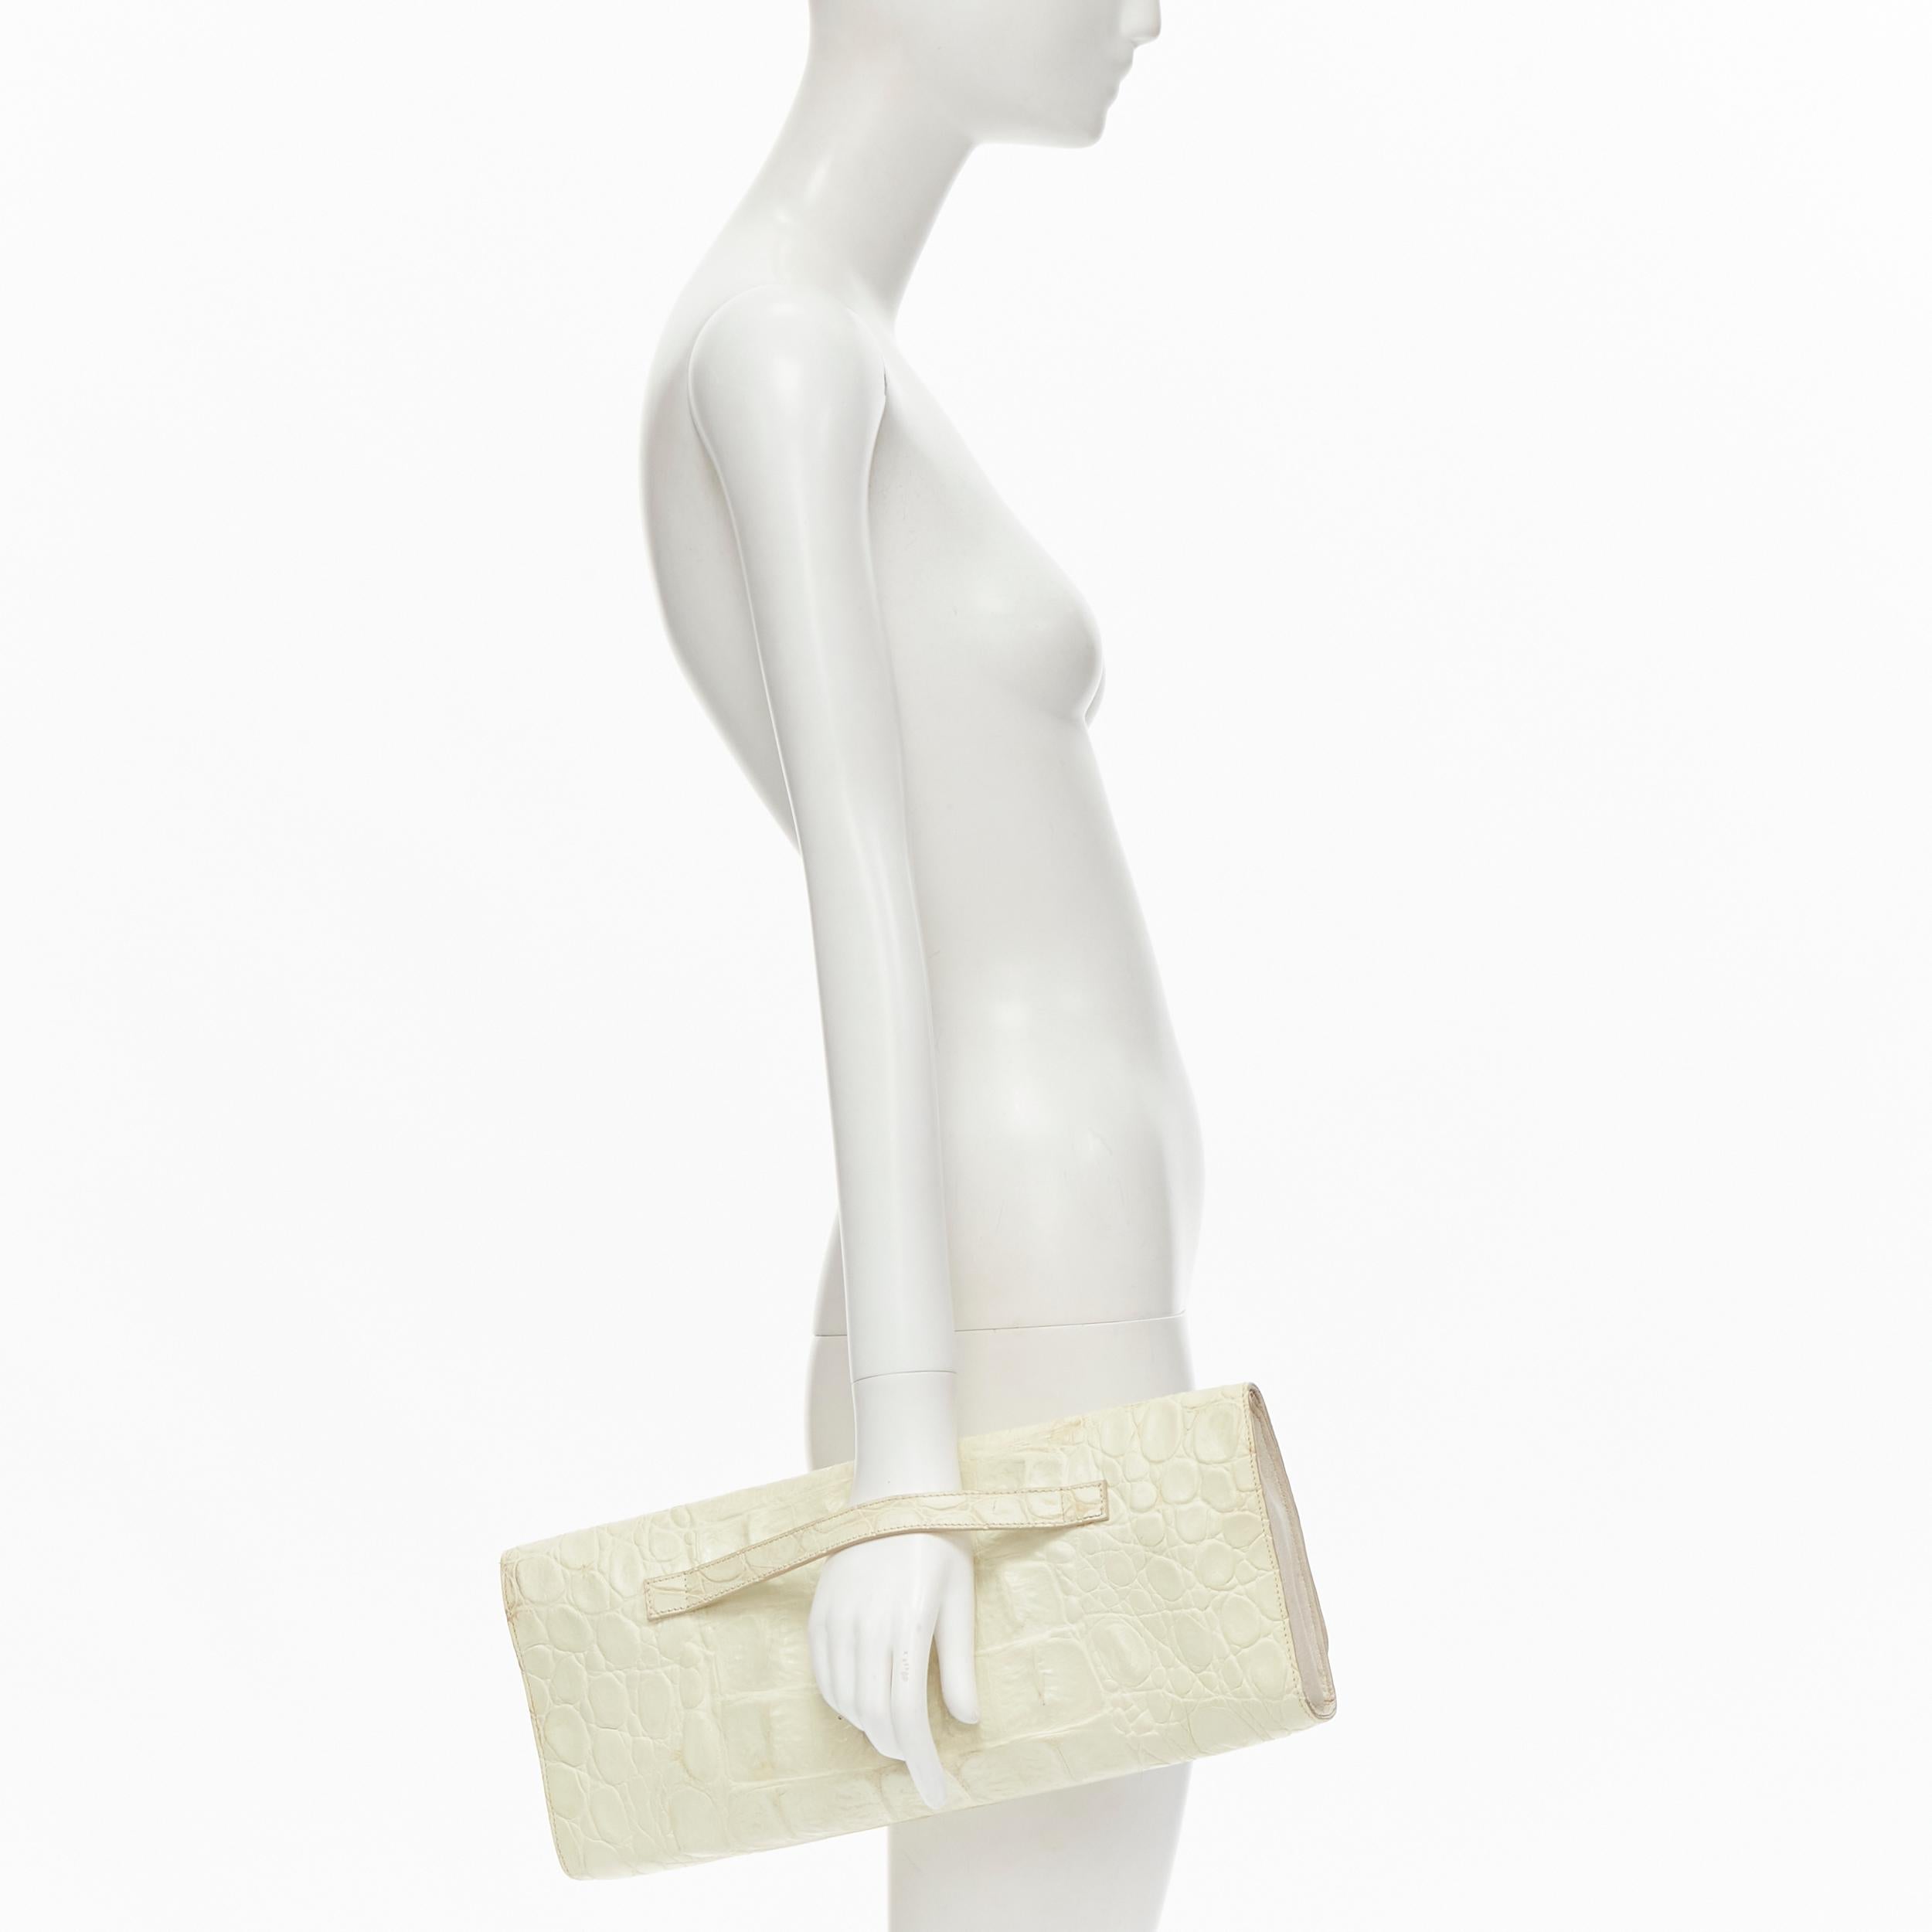 MAISON MARGIELA VIntage off white mock croc leather oversized flap clutch bag 
Reference: TGAS/C01093 
Brand: Maison Margiela 
Material: Leather 
Color: Off white 
Pattern: Solid 
Closure: Magnet 
Extra Detail: Oversized textured mock croc leather